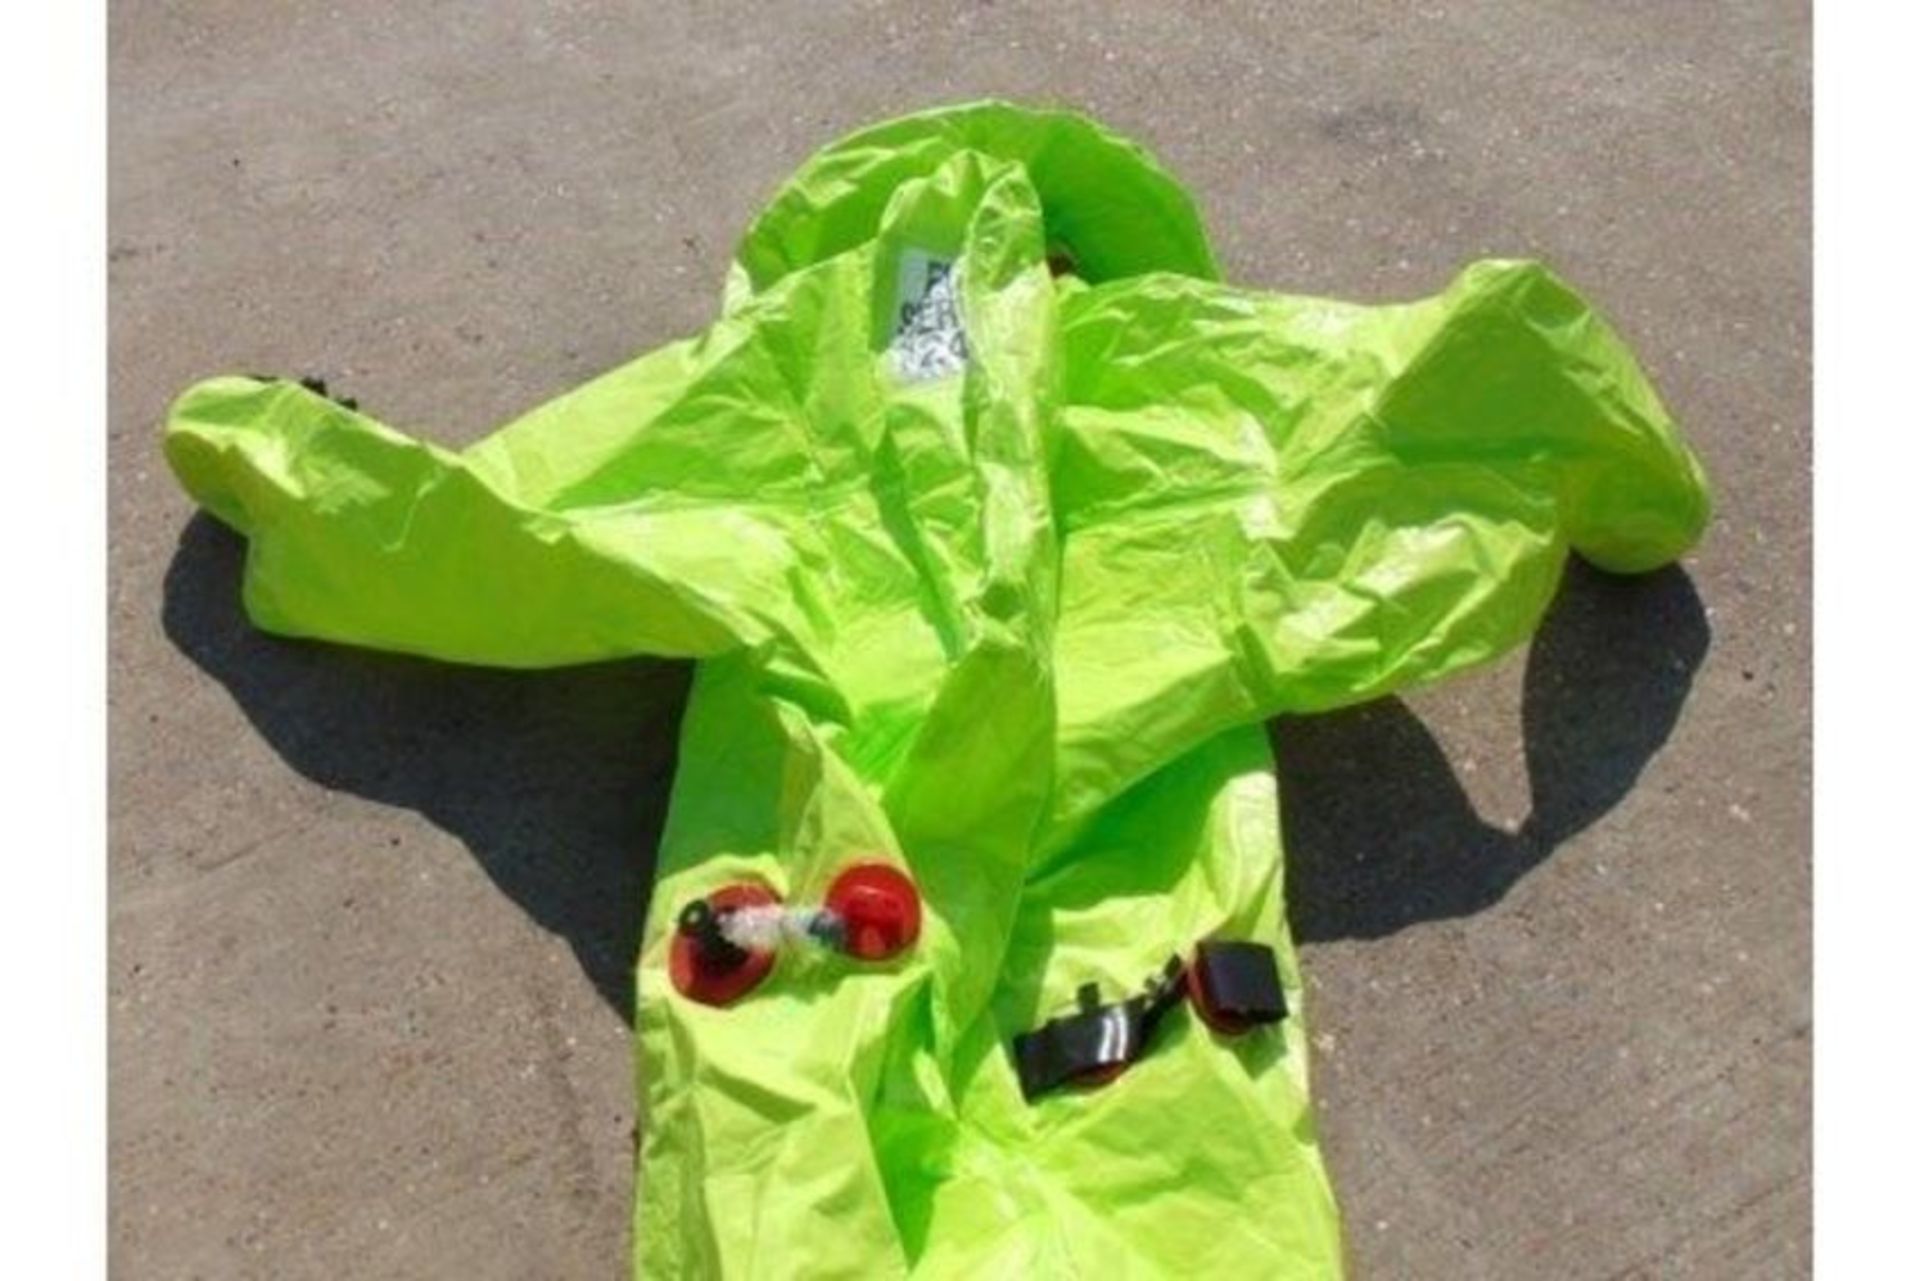 10 x Respirex Tychem TK Gas-Tight Hazmat Suit Type 1A with Attached Boots and Gloves - Image 9 of 11